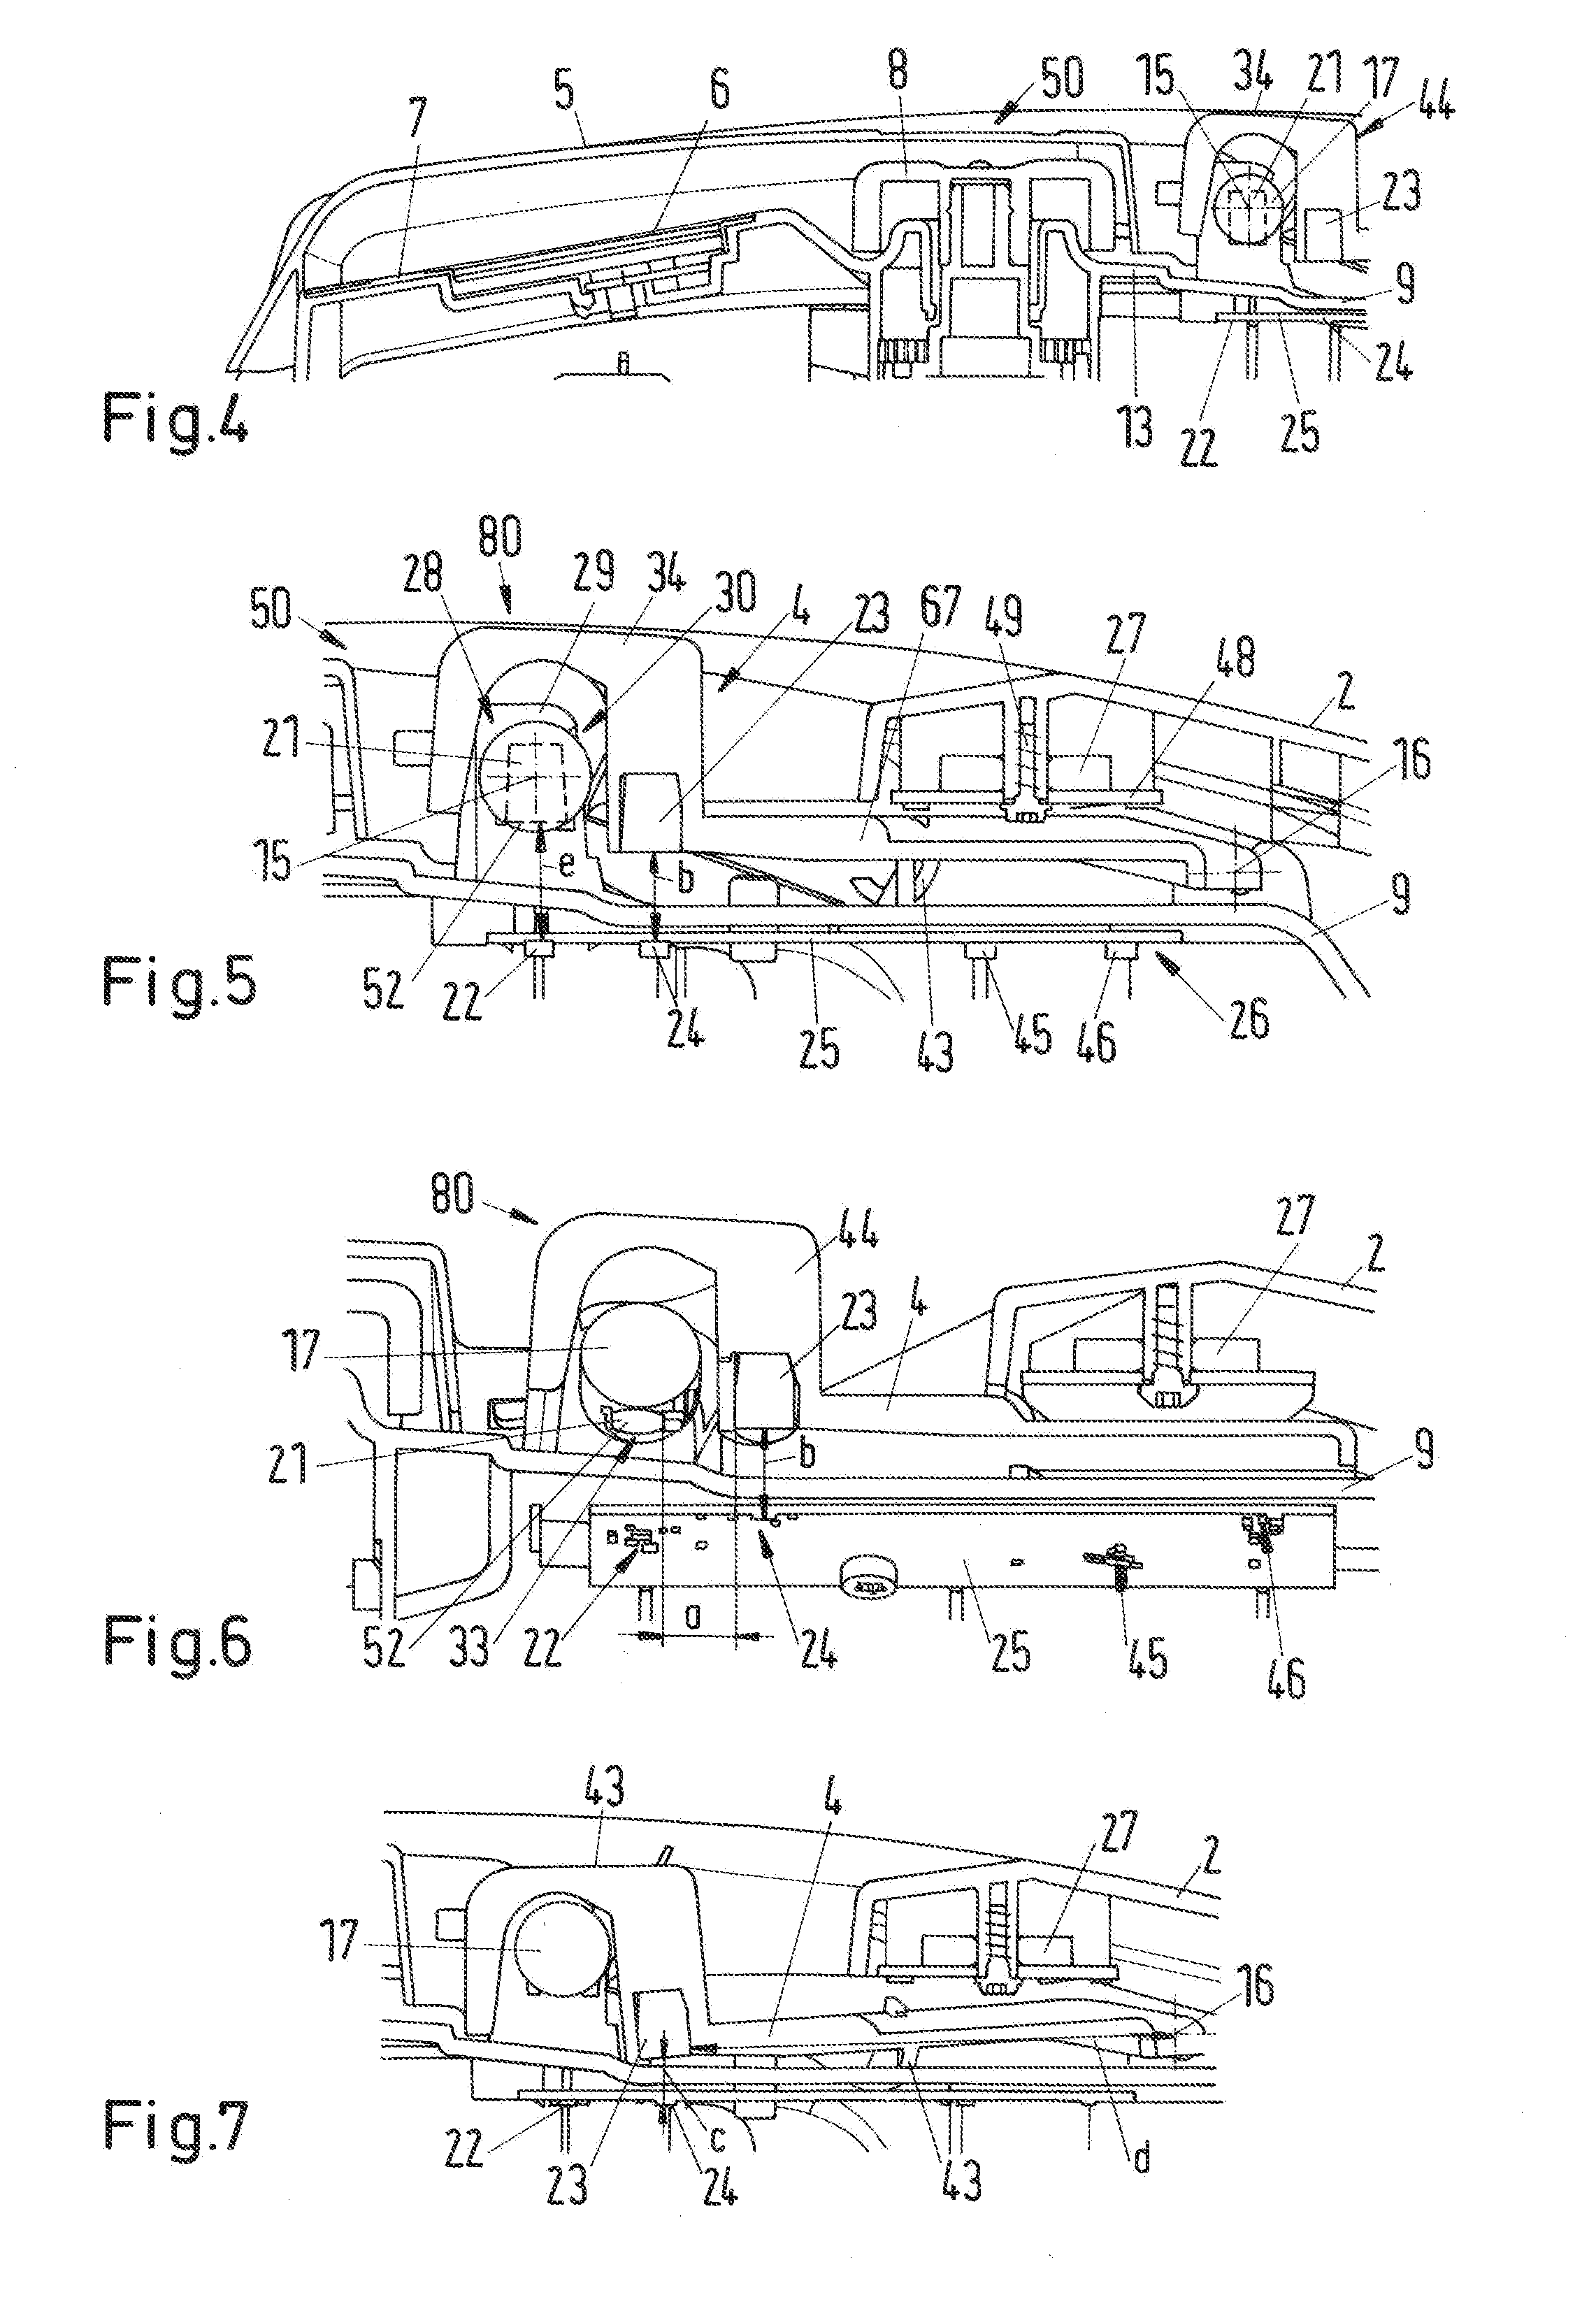 Self-Propelled Working Device